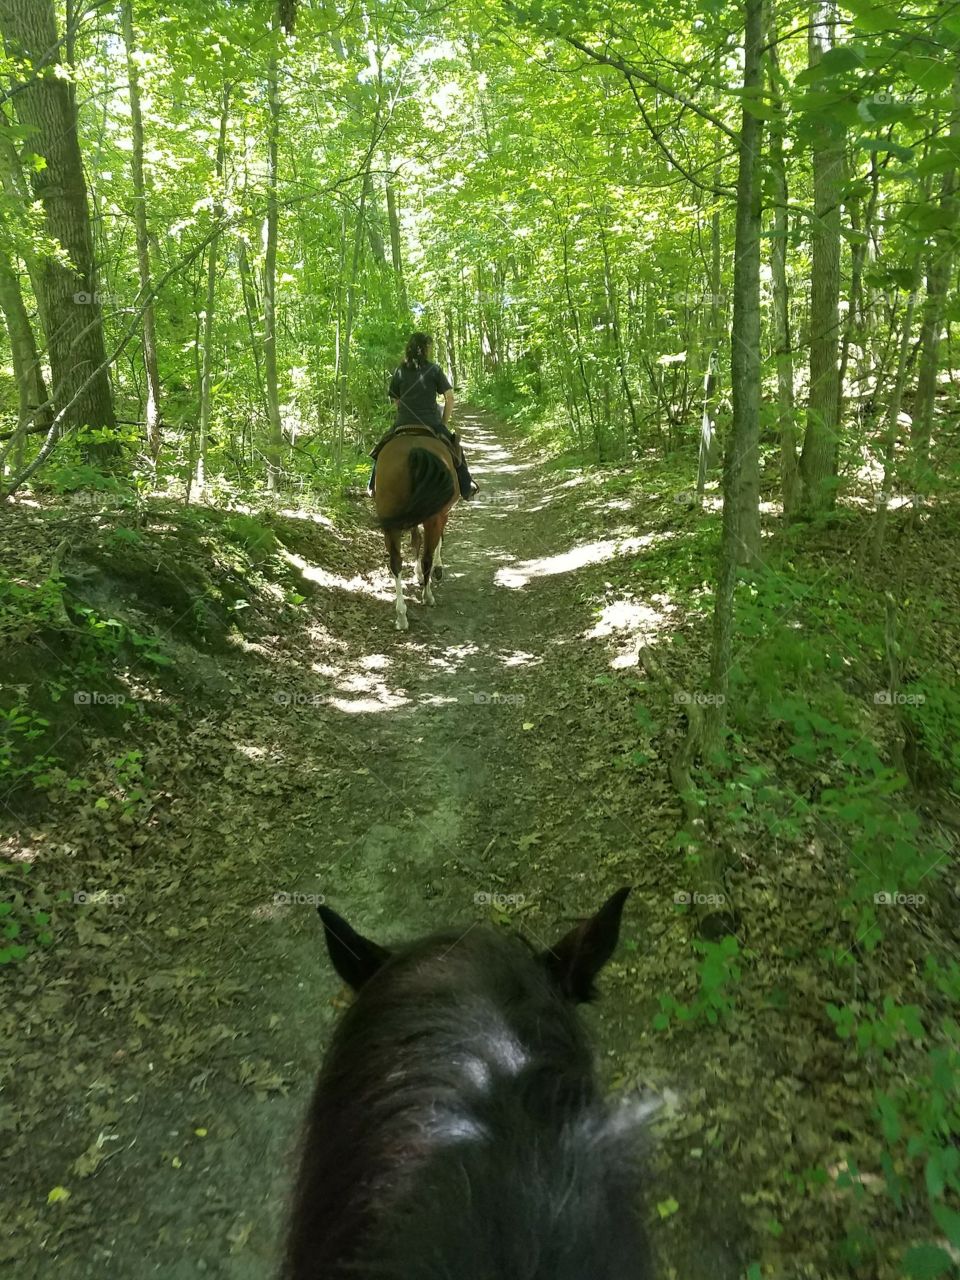 Just a hike in the woods with my horse on a nice sunny day!